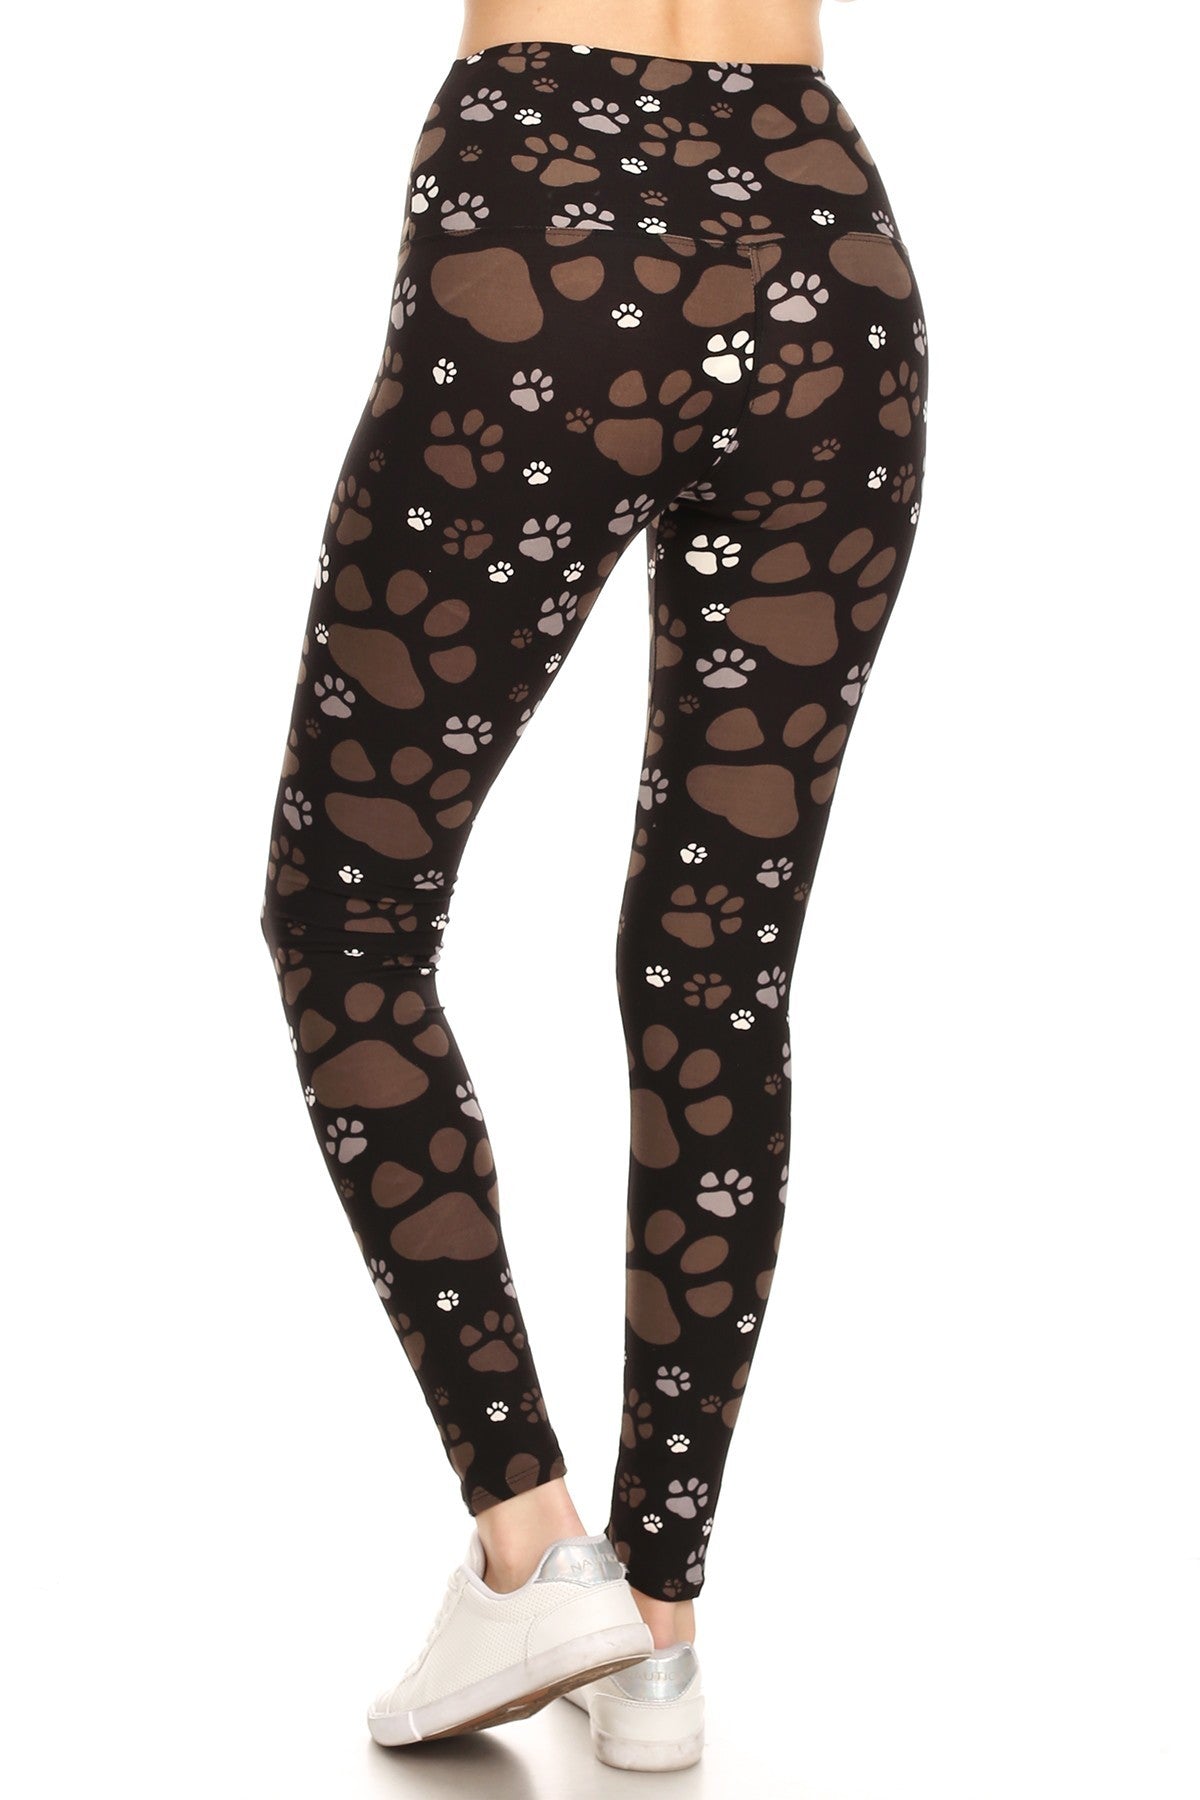 5-inch Long Yoga Style Banded Lined Paw Printed Knit Legging With High Waist Smile Sparker